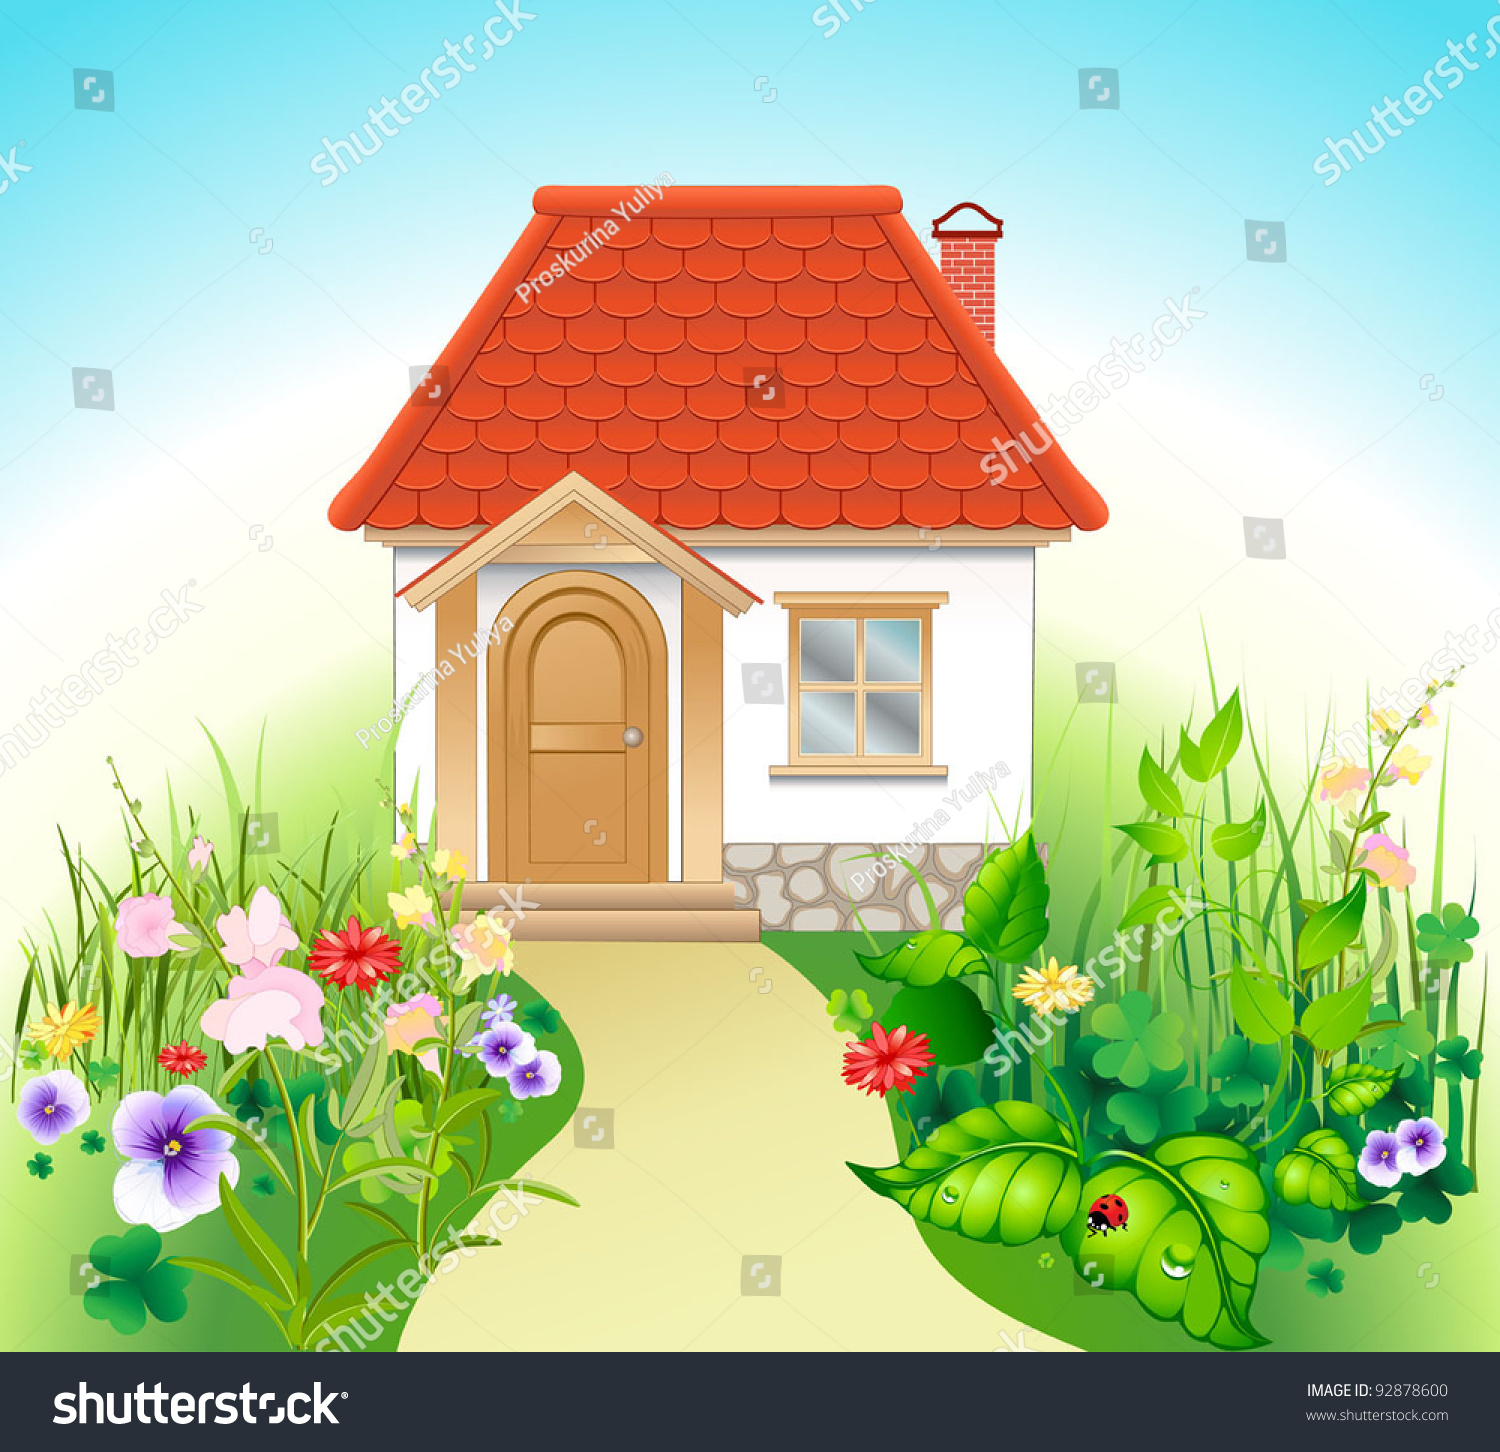 clipart of house with garden - photo #4